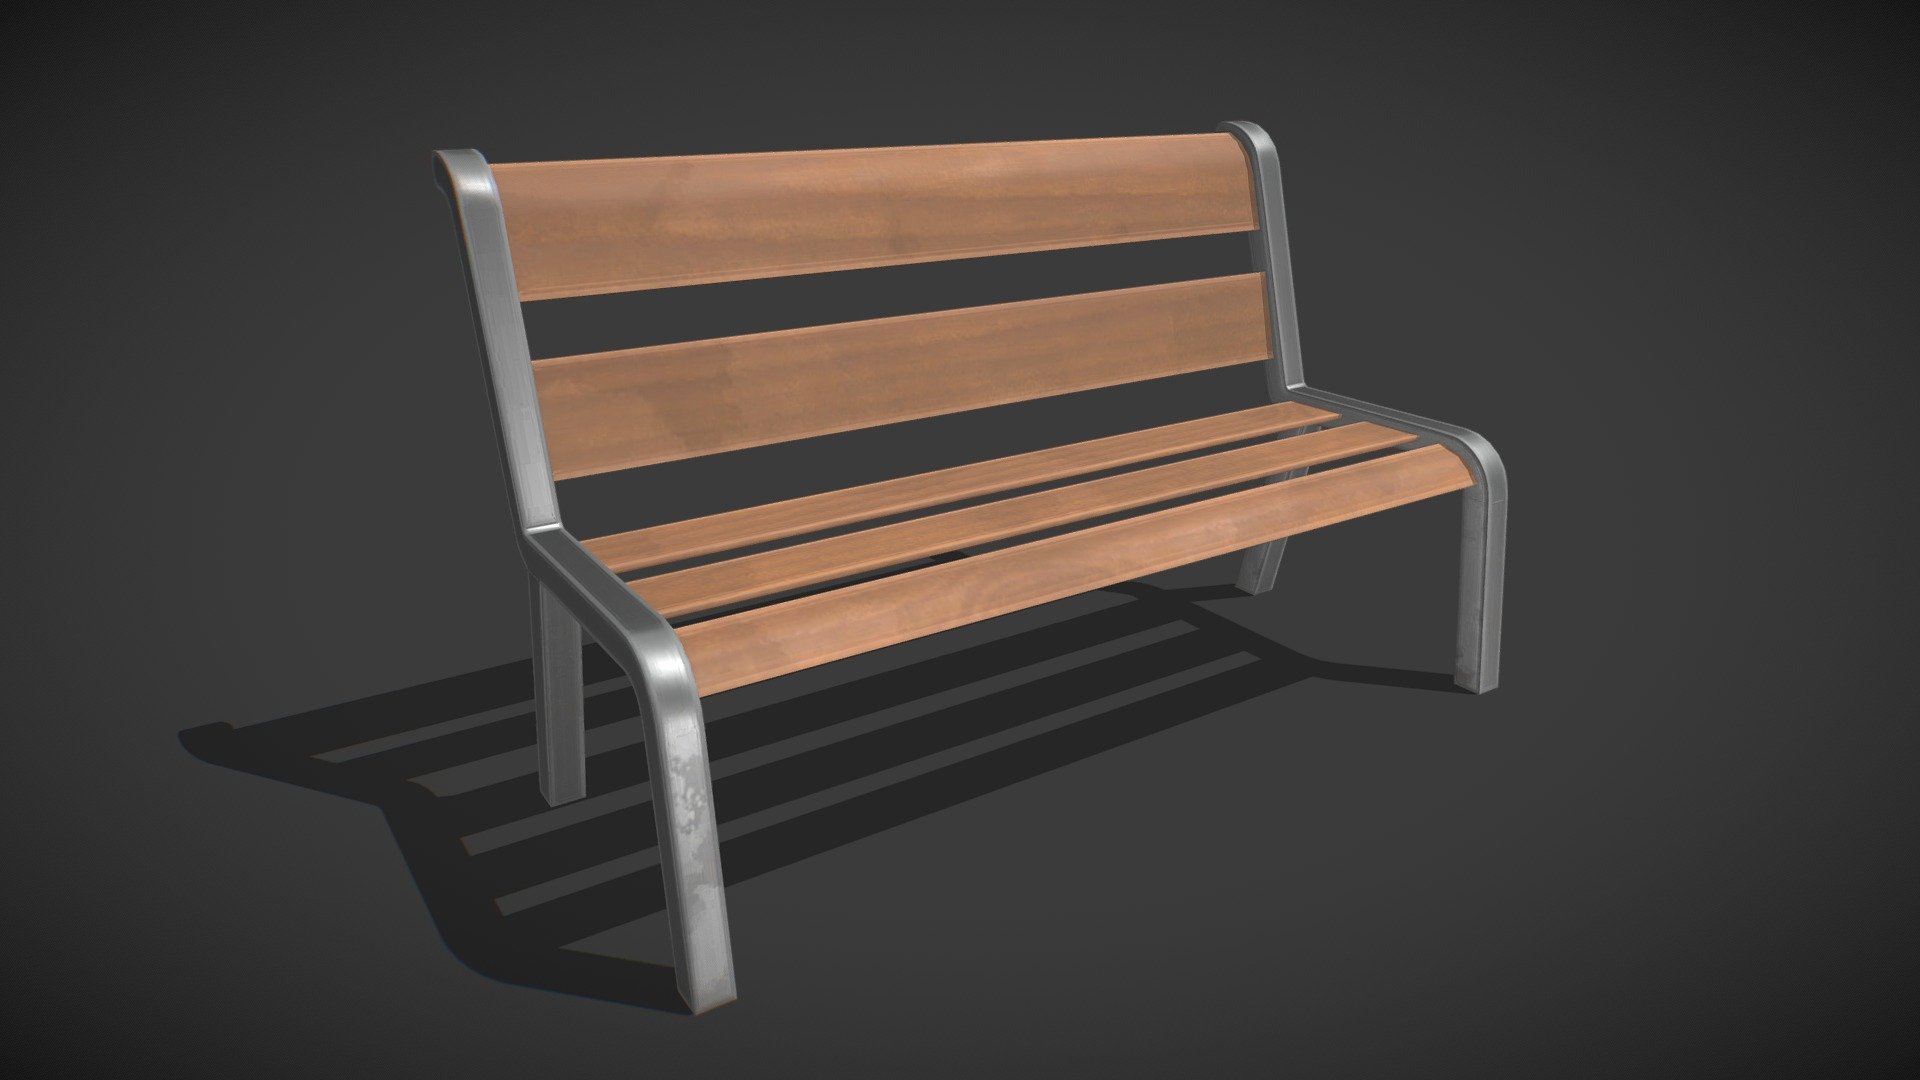 Stylized Wooden Bench with Stylized PBR Textures. Suitable for any scene. Ready to use in any project.

Are you liked this model? Feel free to take a look on my another models! Here

Features:

.Fbx, .Obj, .Uasset and .Blend files.

Low Poly Mesh game-ready.

Real-World Scale (centimeters).

Unreal Project: 4.18+

Custom Collision for Unreal Engine 4 (Handmade).

Tris Count: 428.

Number of Textures:5

Number of Textures (UE4): 3

PBR Textures (1024x1024) (PNG).

Type of Textures: Base Color, Roughness, Metallic, Normal Map and Ambient Occlusion (PNG)

Combined RMA texture (Roughness, Metallic and Ambient Occlusion) for Unreal Engine (PNG) 3d model